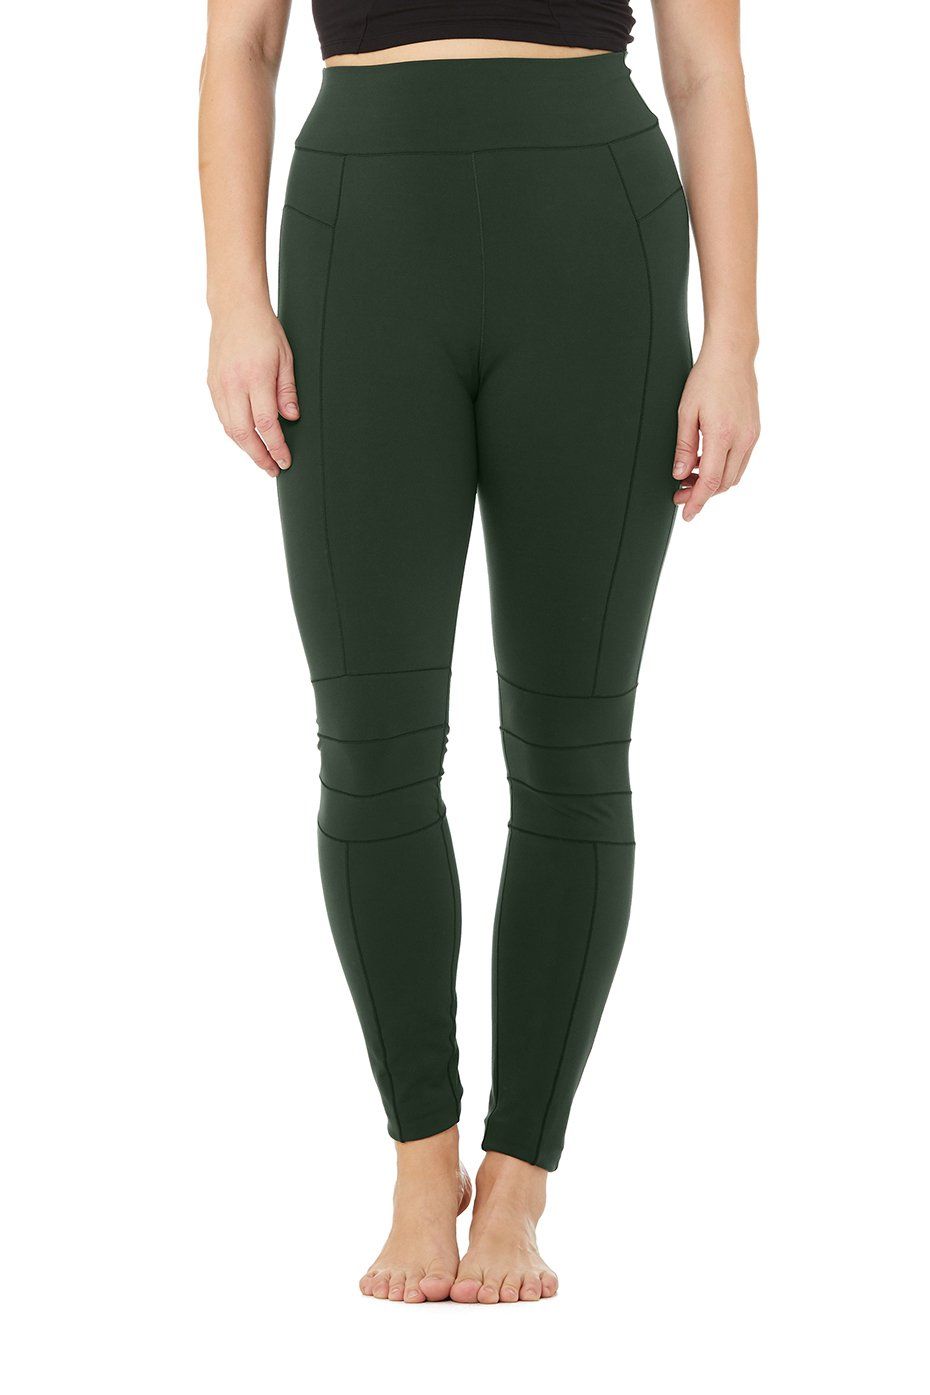 Buy Alo Yoga® High-waist Airlift Legging - Midnight Green At 20% Off